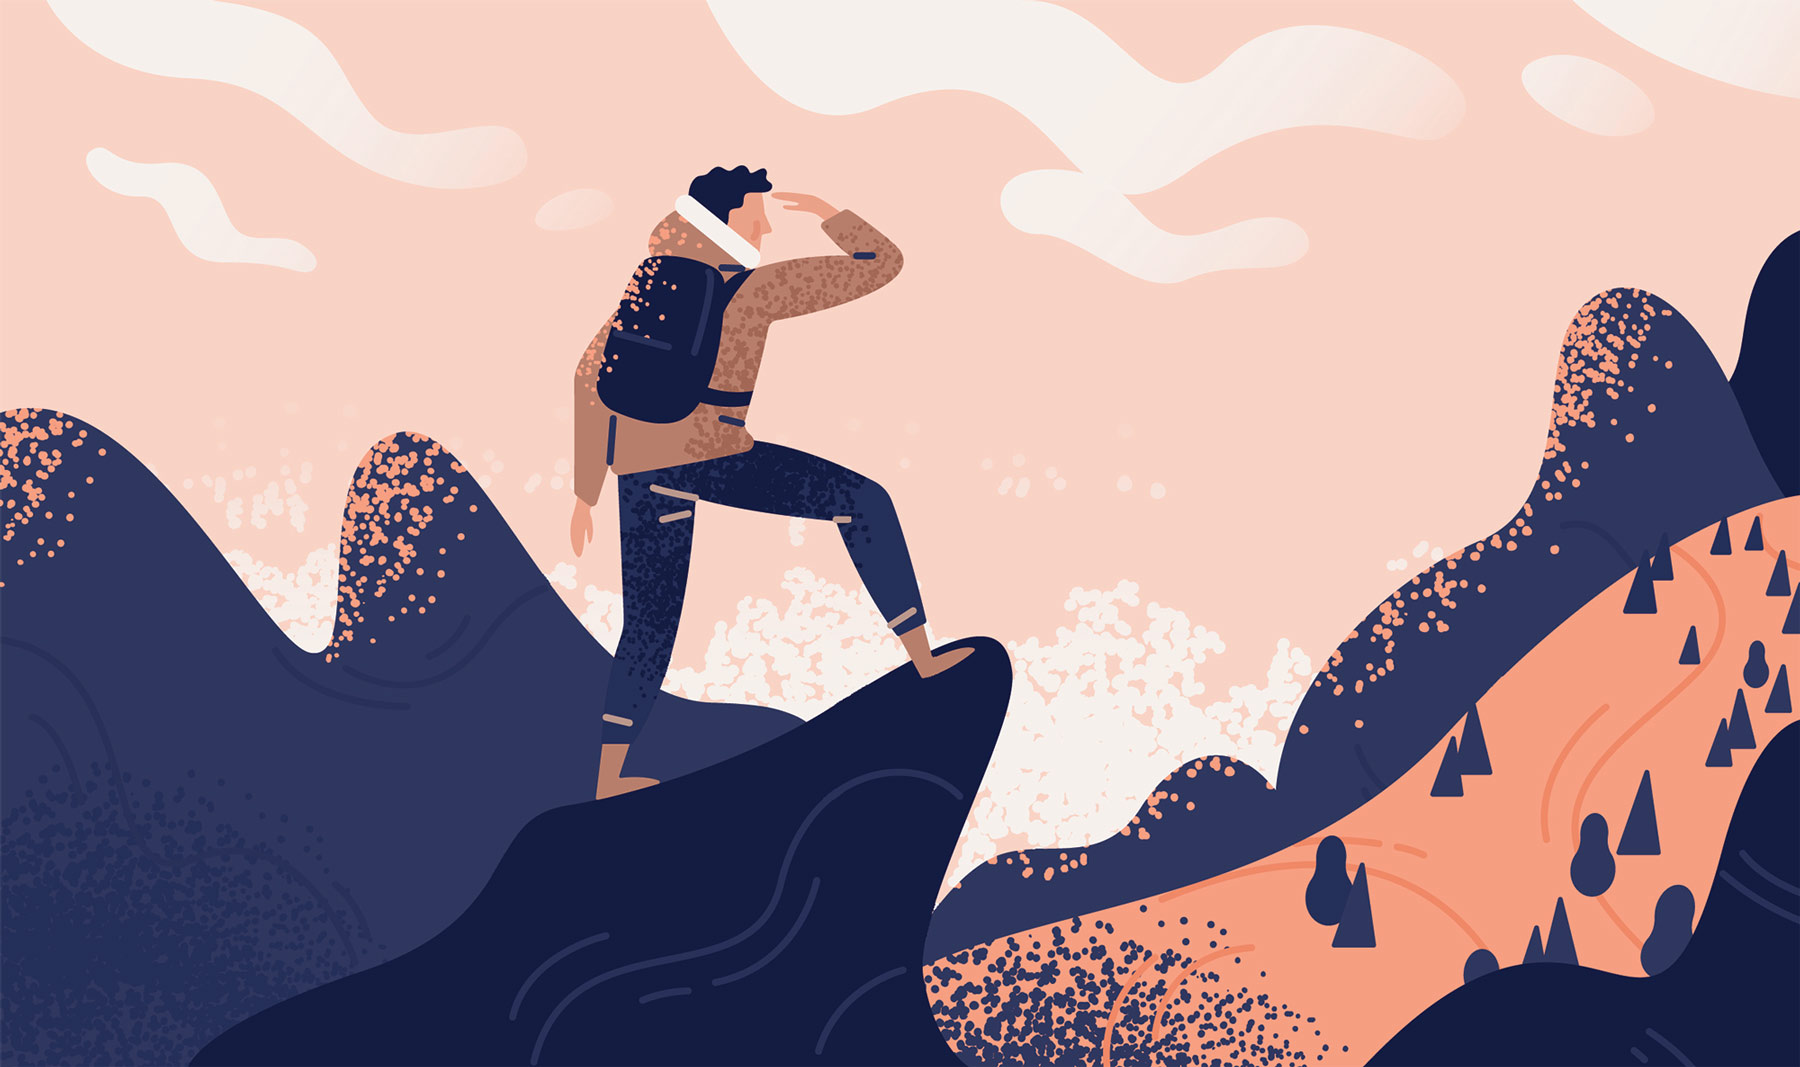 Stylized vector drawing of hiker looking out over cliff edge